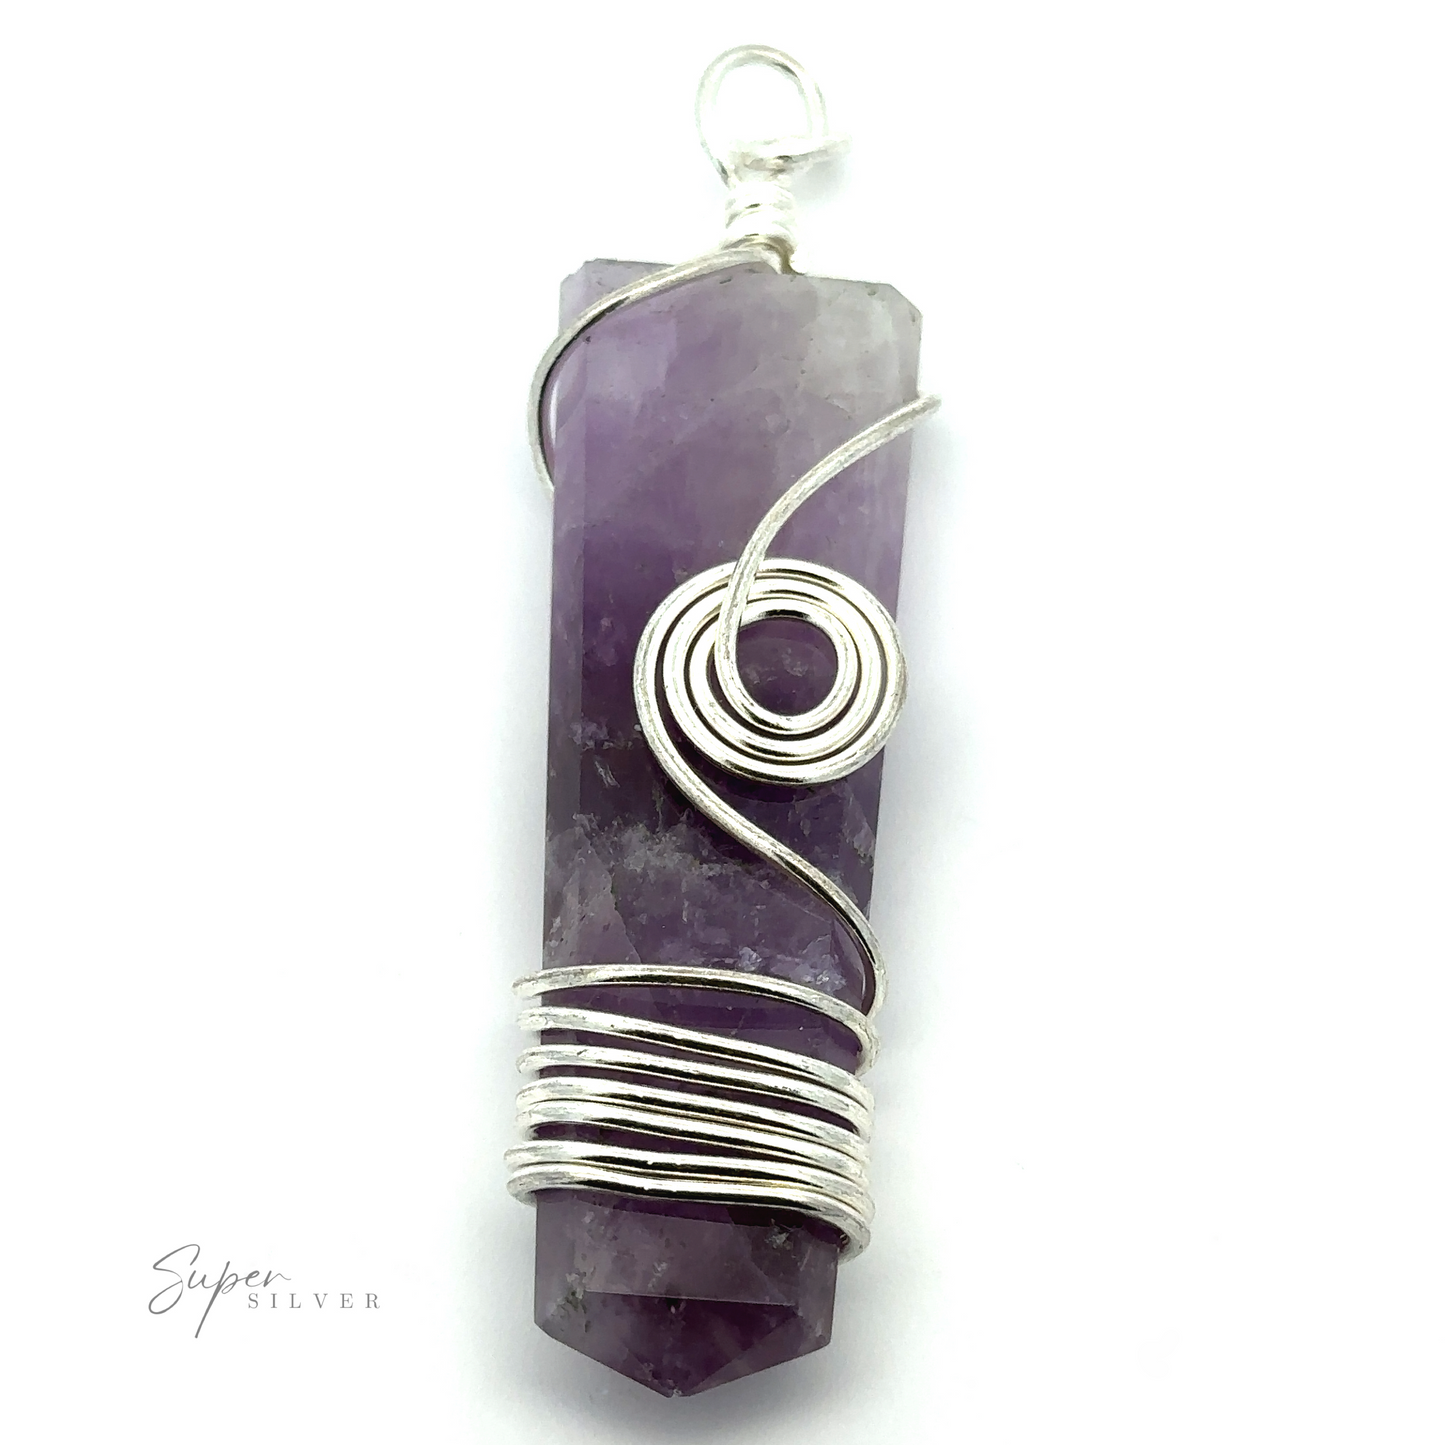 
                  
                    A Stone Slab Pendant with Wire Wrapping featuring a purple crystal wrapped in silver wire. The coiled wire forms decorative loops around the middle and top of the hexagonally faceted crystal, which has pointed ends. This piece exemplifies wire wrapped jewelry with its intricate mixed metals design.
                  
                